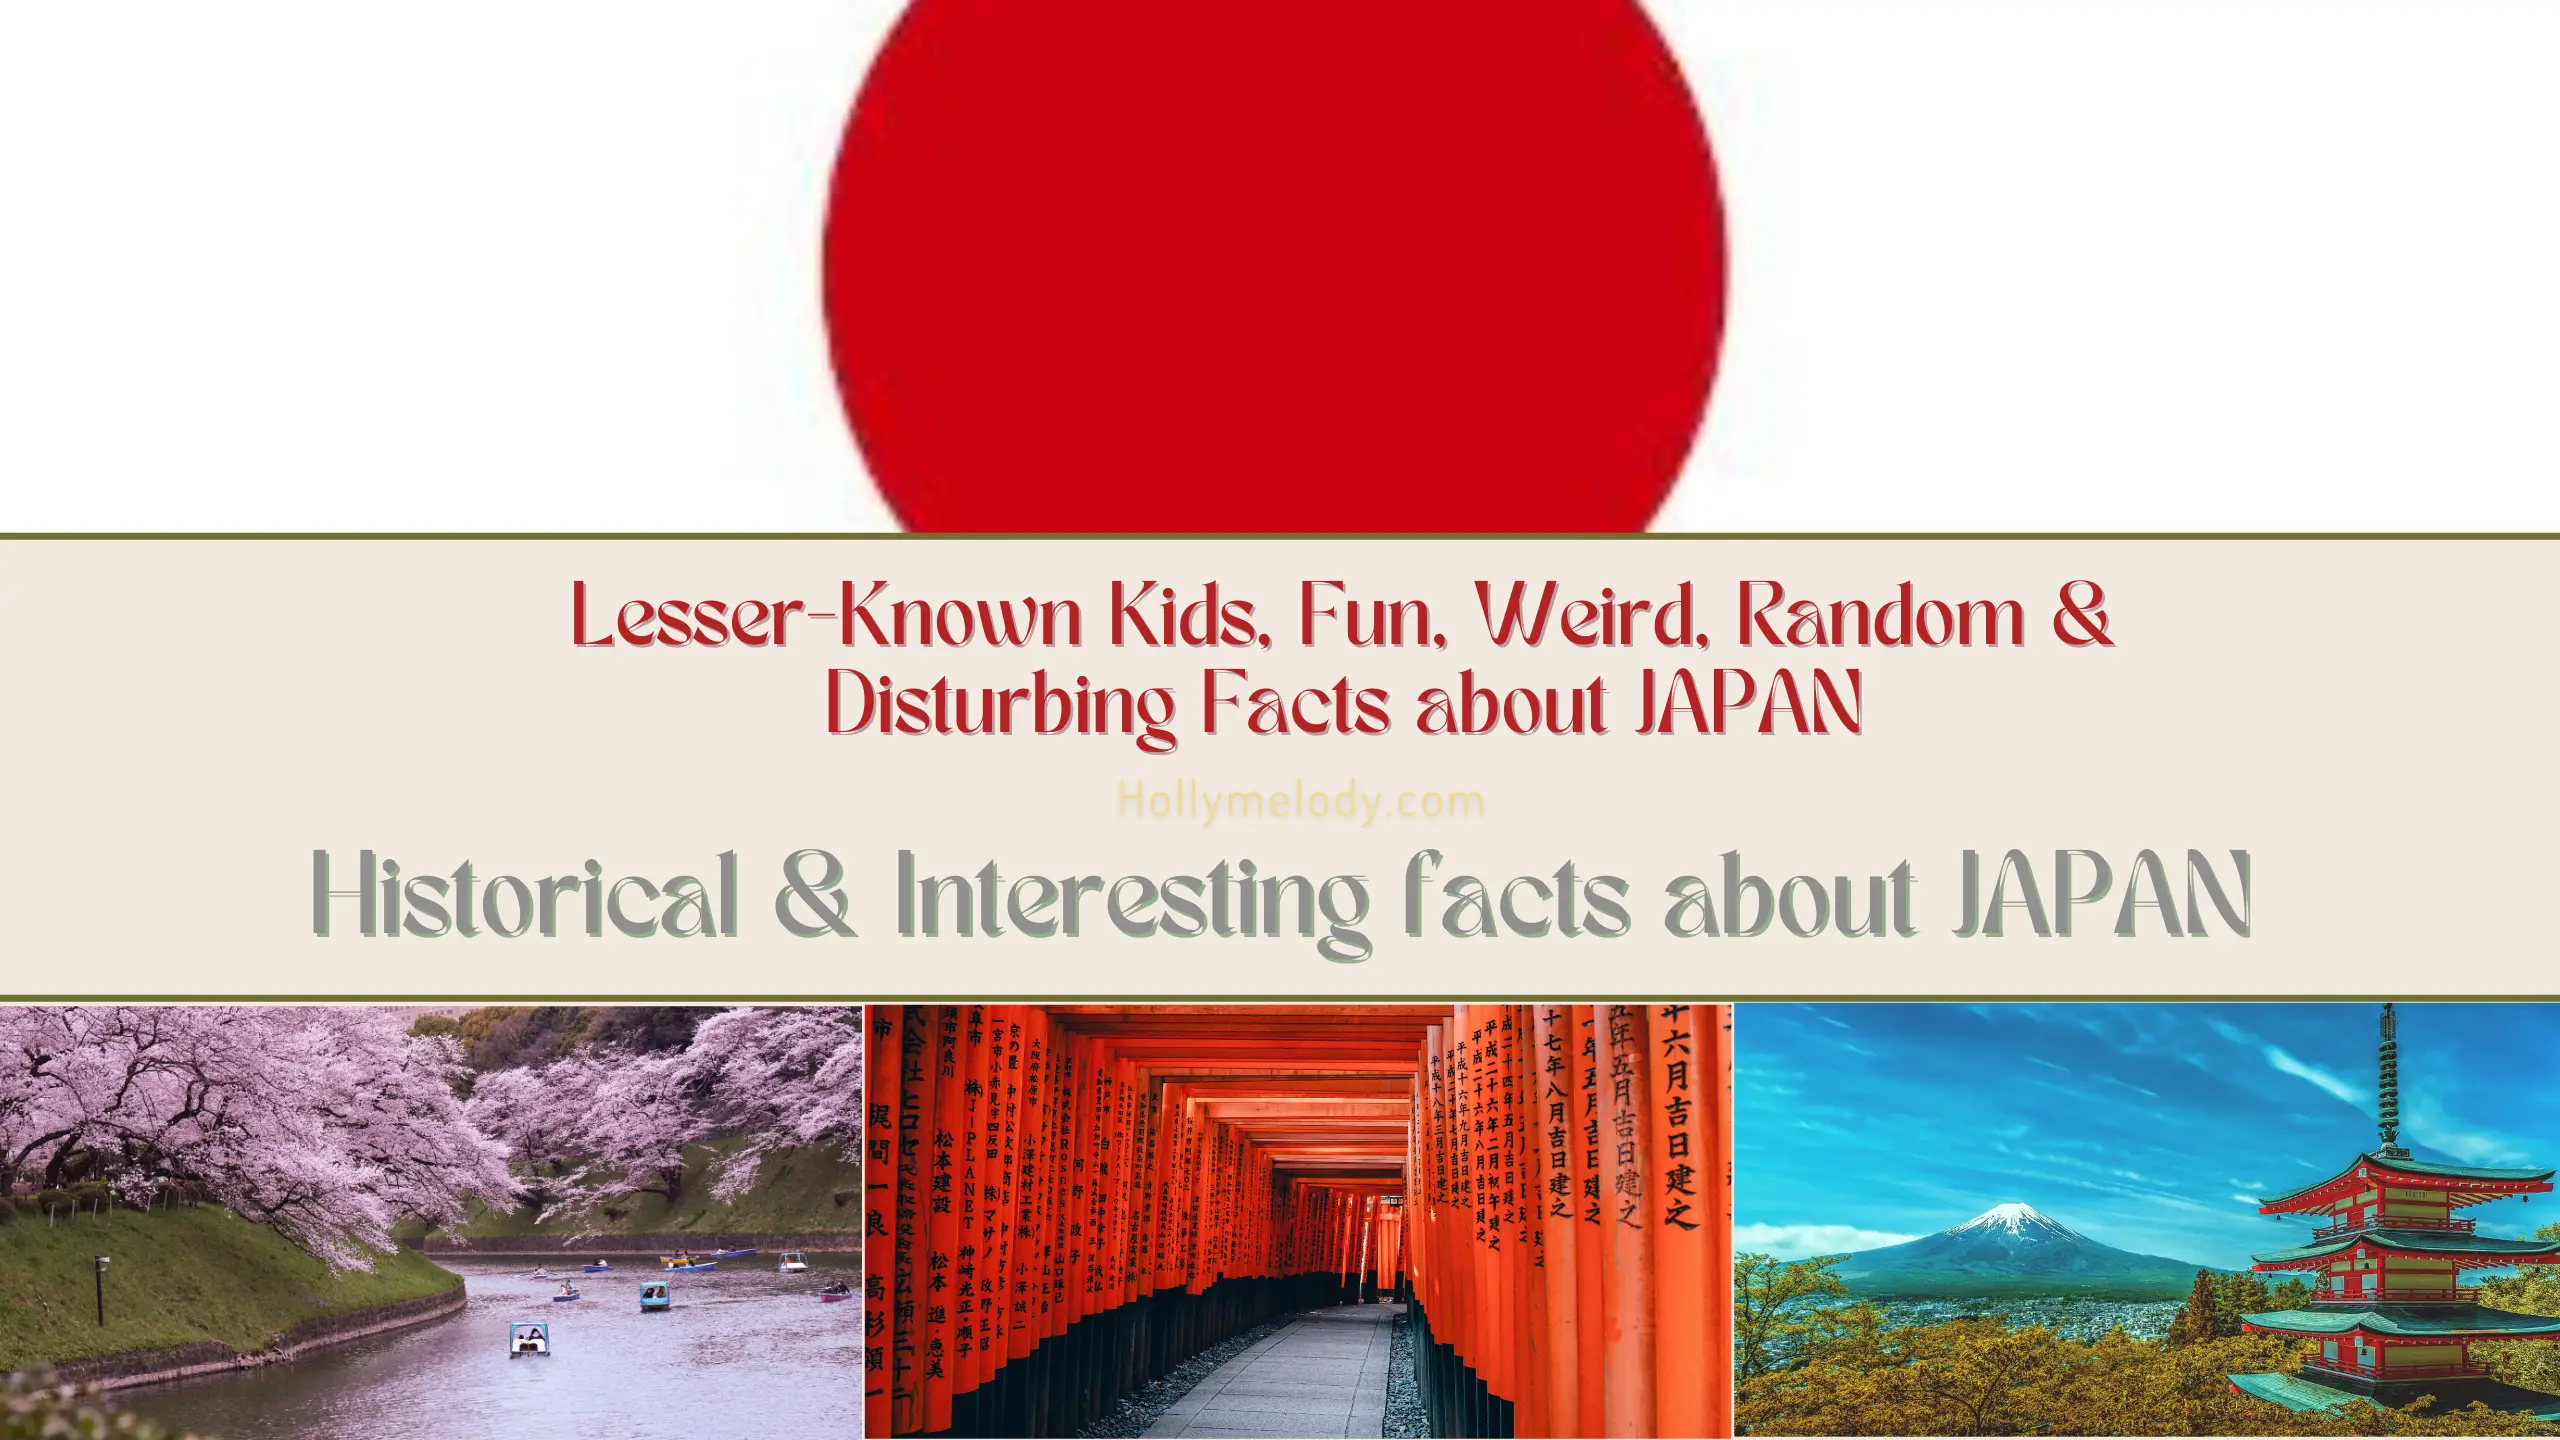 Facts about JAPAN